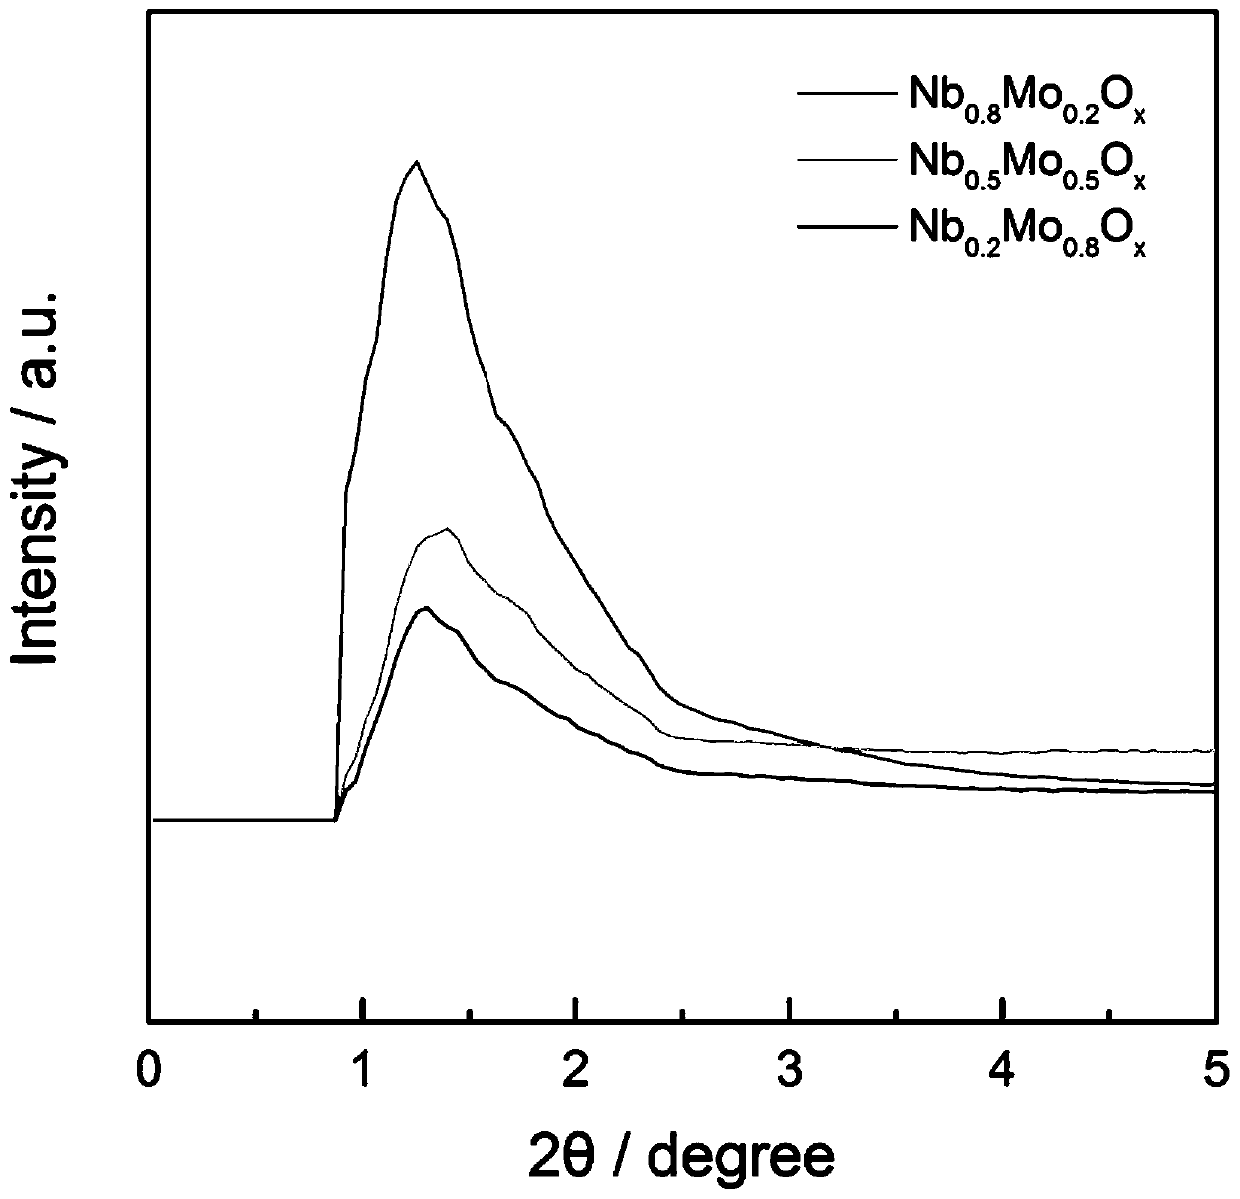 Preparation method and application of Nb-Mo eutectic mesoporous metal oxide catalyst